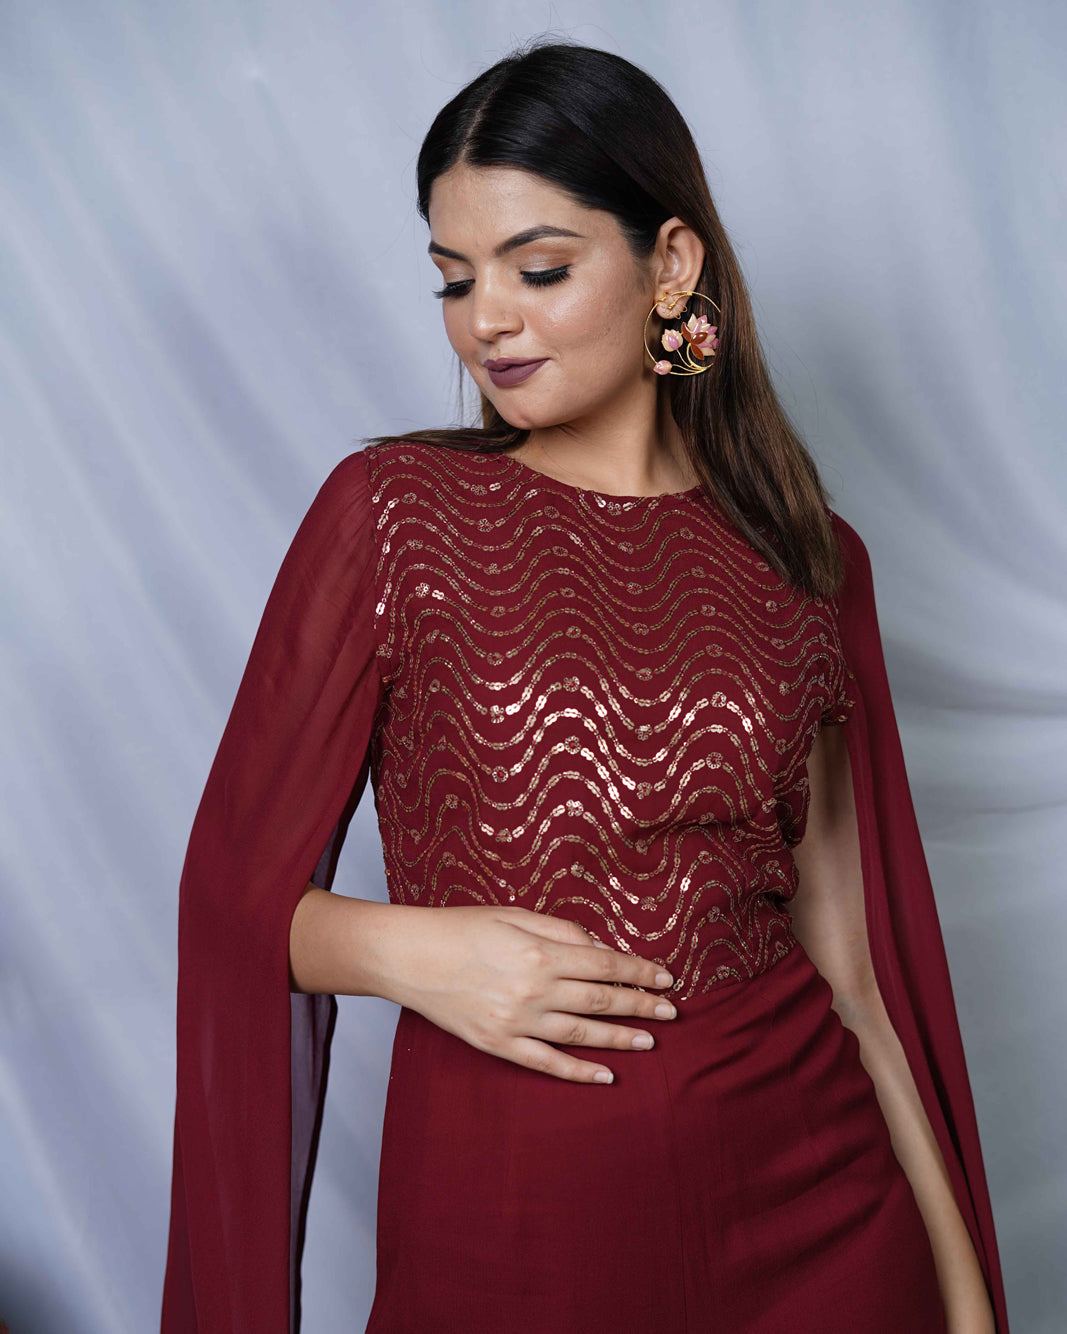 Nazuk Maroon Indo- Western Party Jumpsuit with Cape Sleeves and Gold Embroidery Details for Cocktail